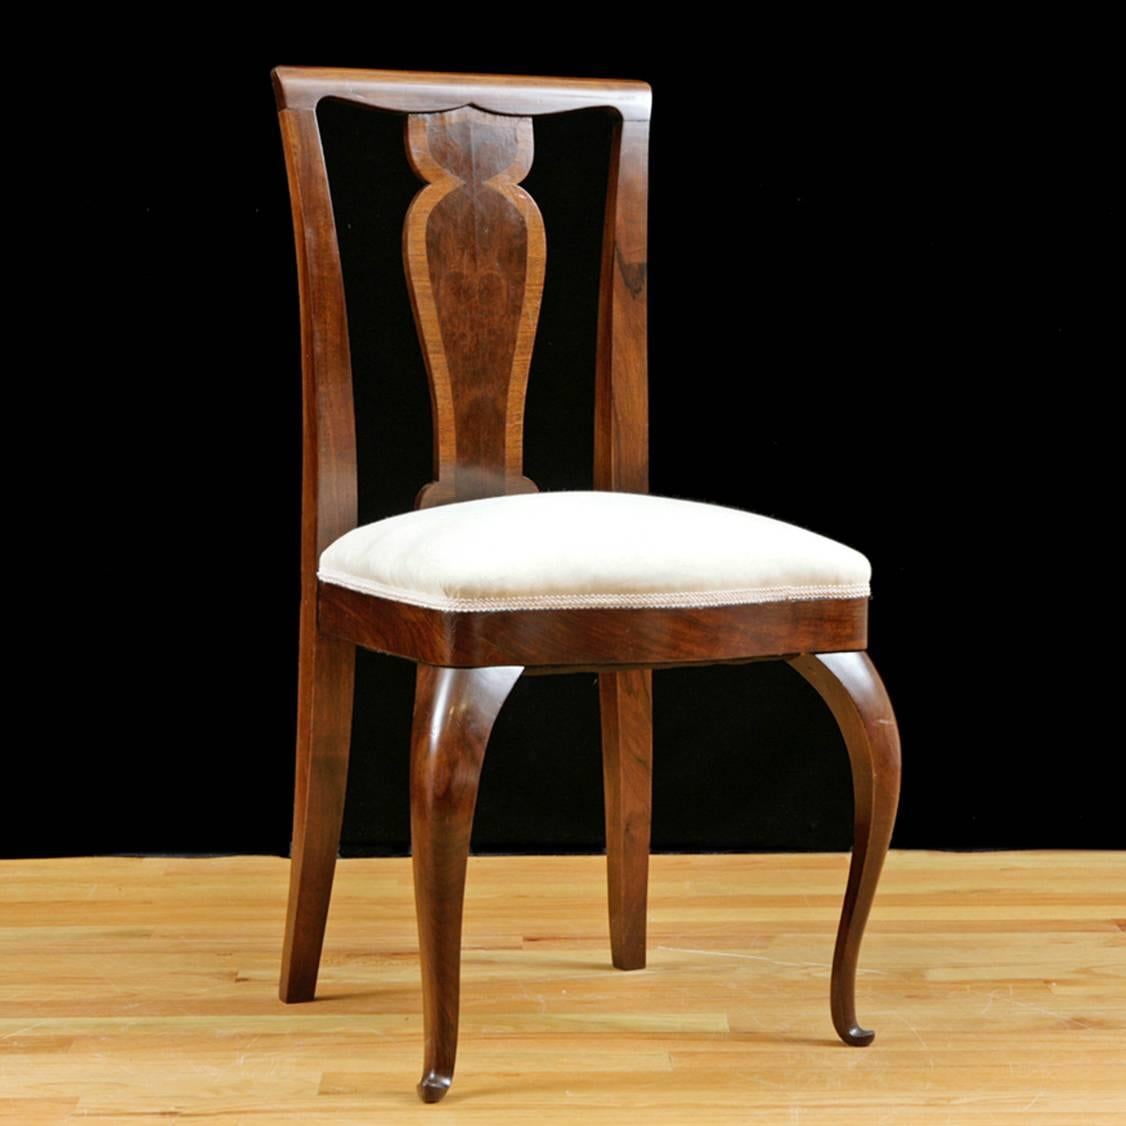 A handsome set of four dining chairs in rosewood with carved splat banded in a lighter wood, cabriole front legs and upholstered seat, Northern Europe, circa 1910. Chairs have been French-polished and upholstered in a cream-colored